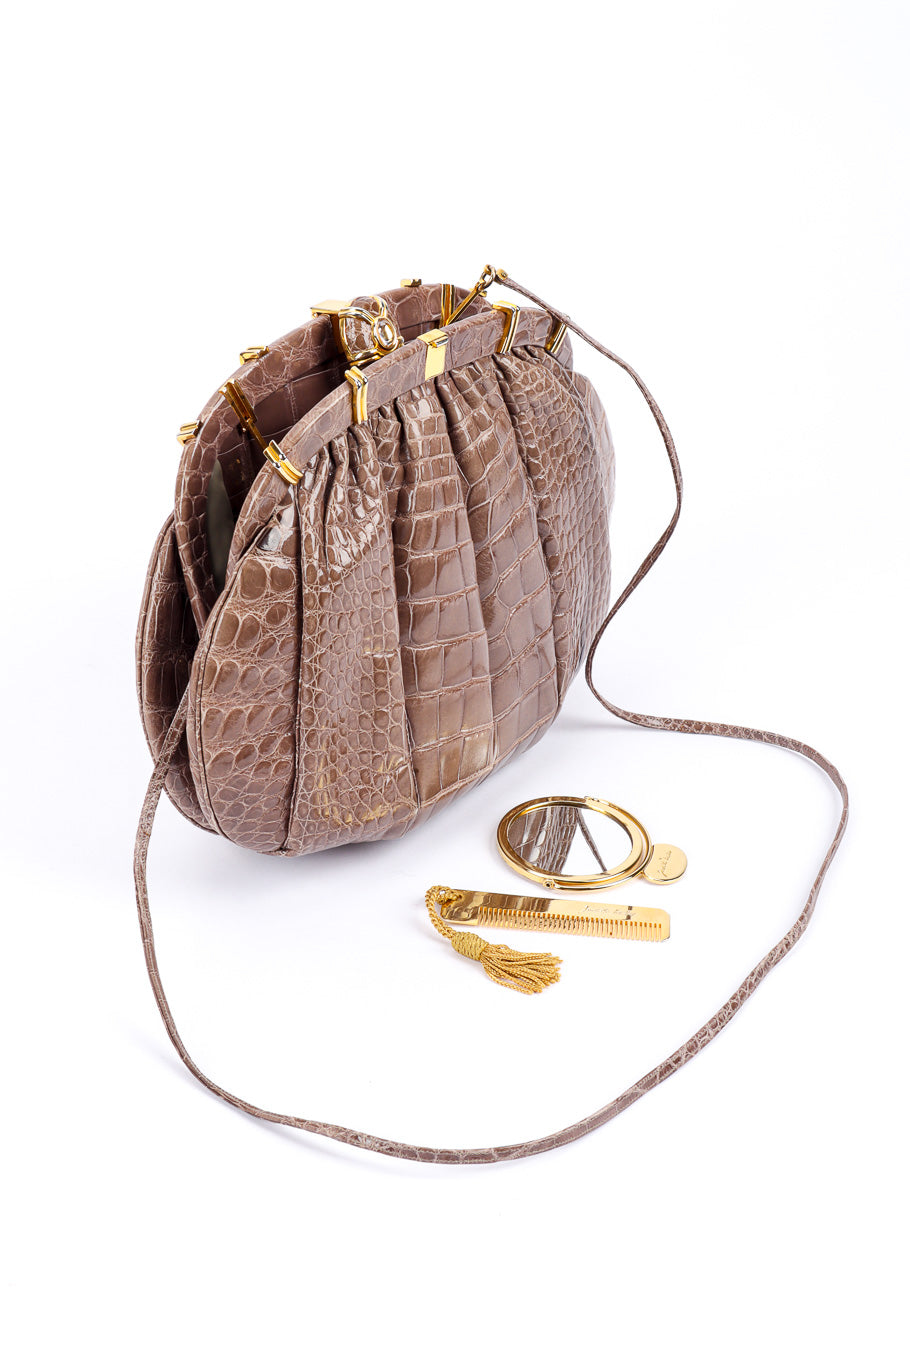 Ruched Alligator Handbag by Judith Leiber standing with mirror and comb  @recessla